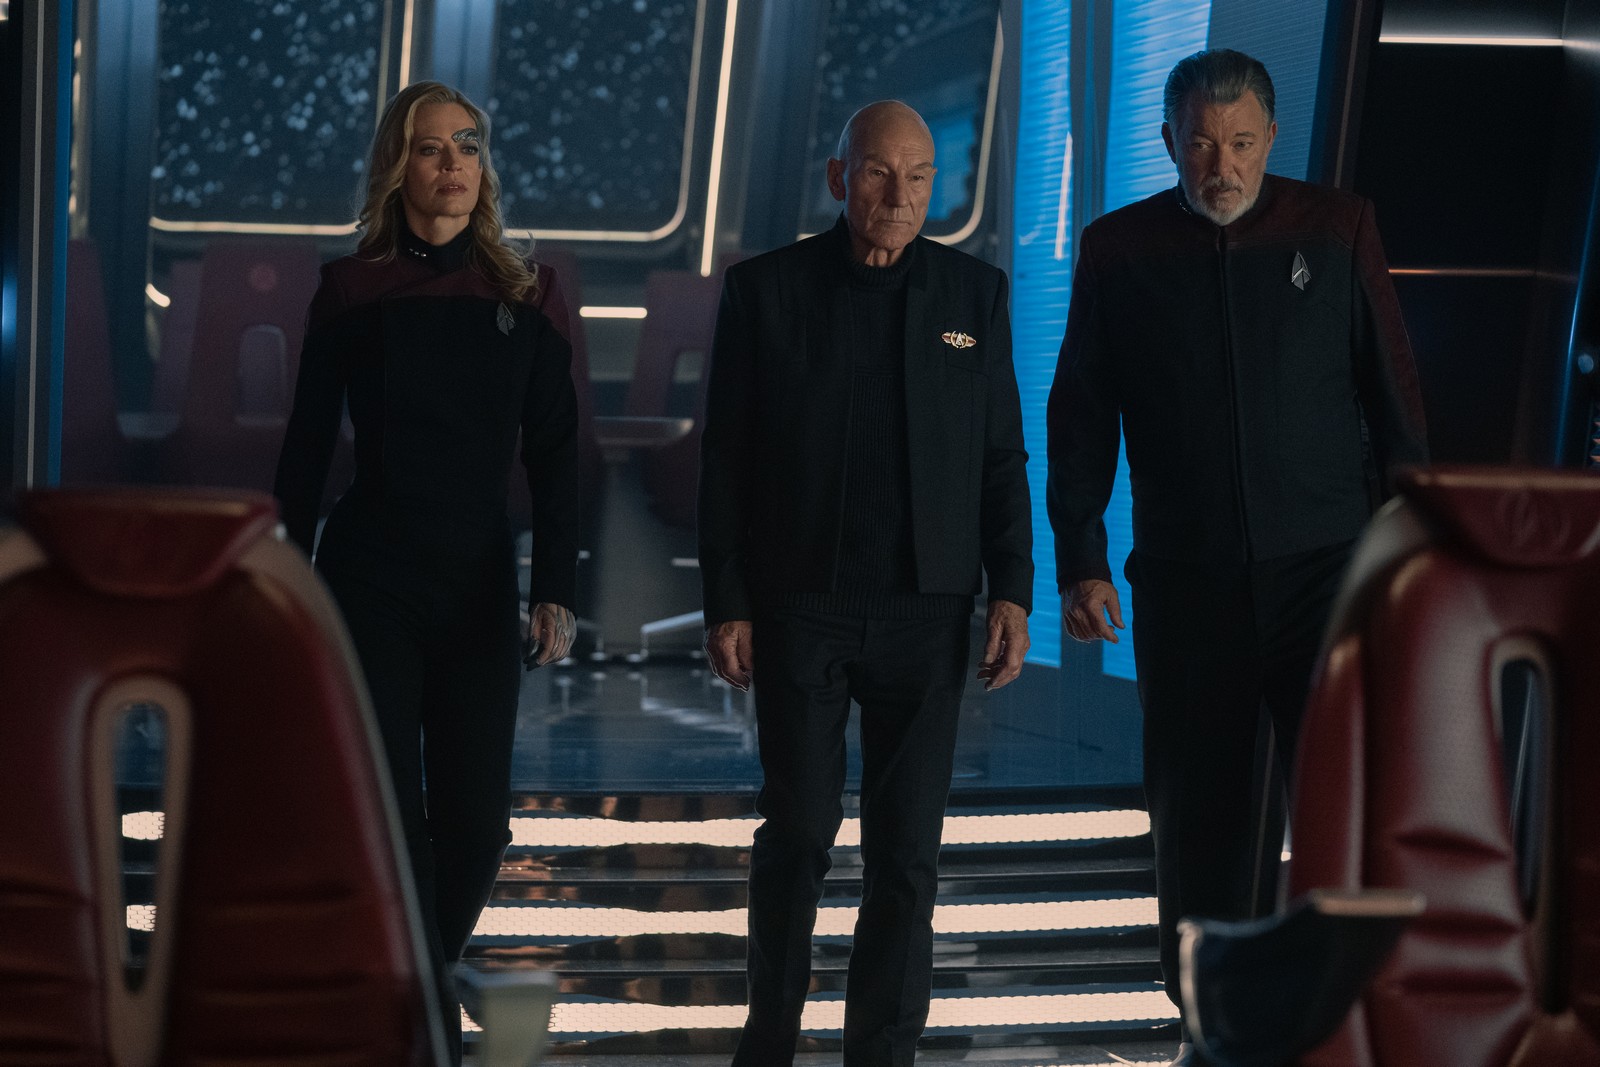 Review: \'Star Trek: Picard\' Sets “The Generation” Course – An With Intriguing New Next